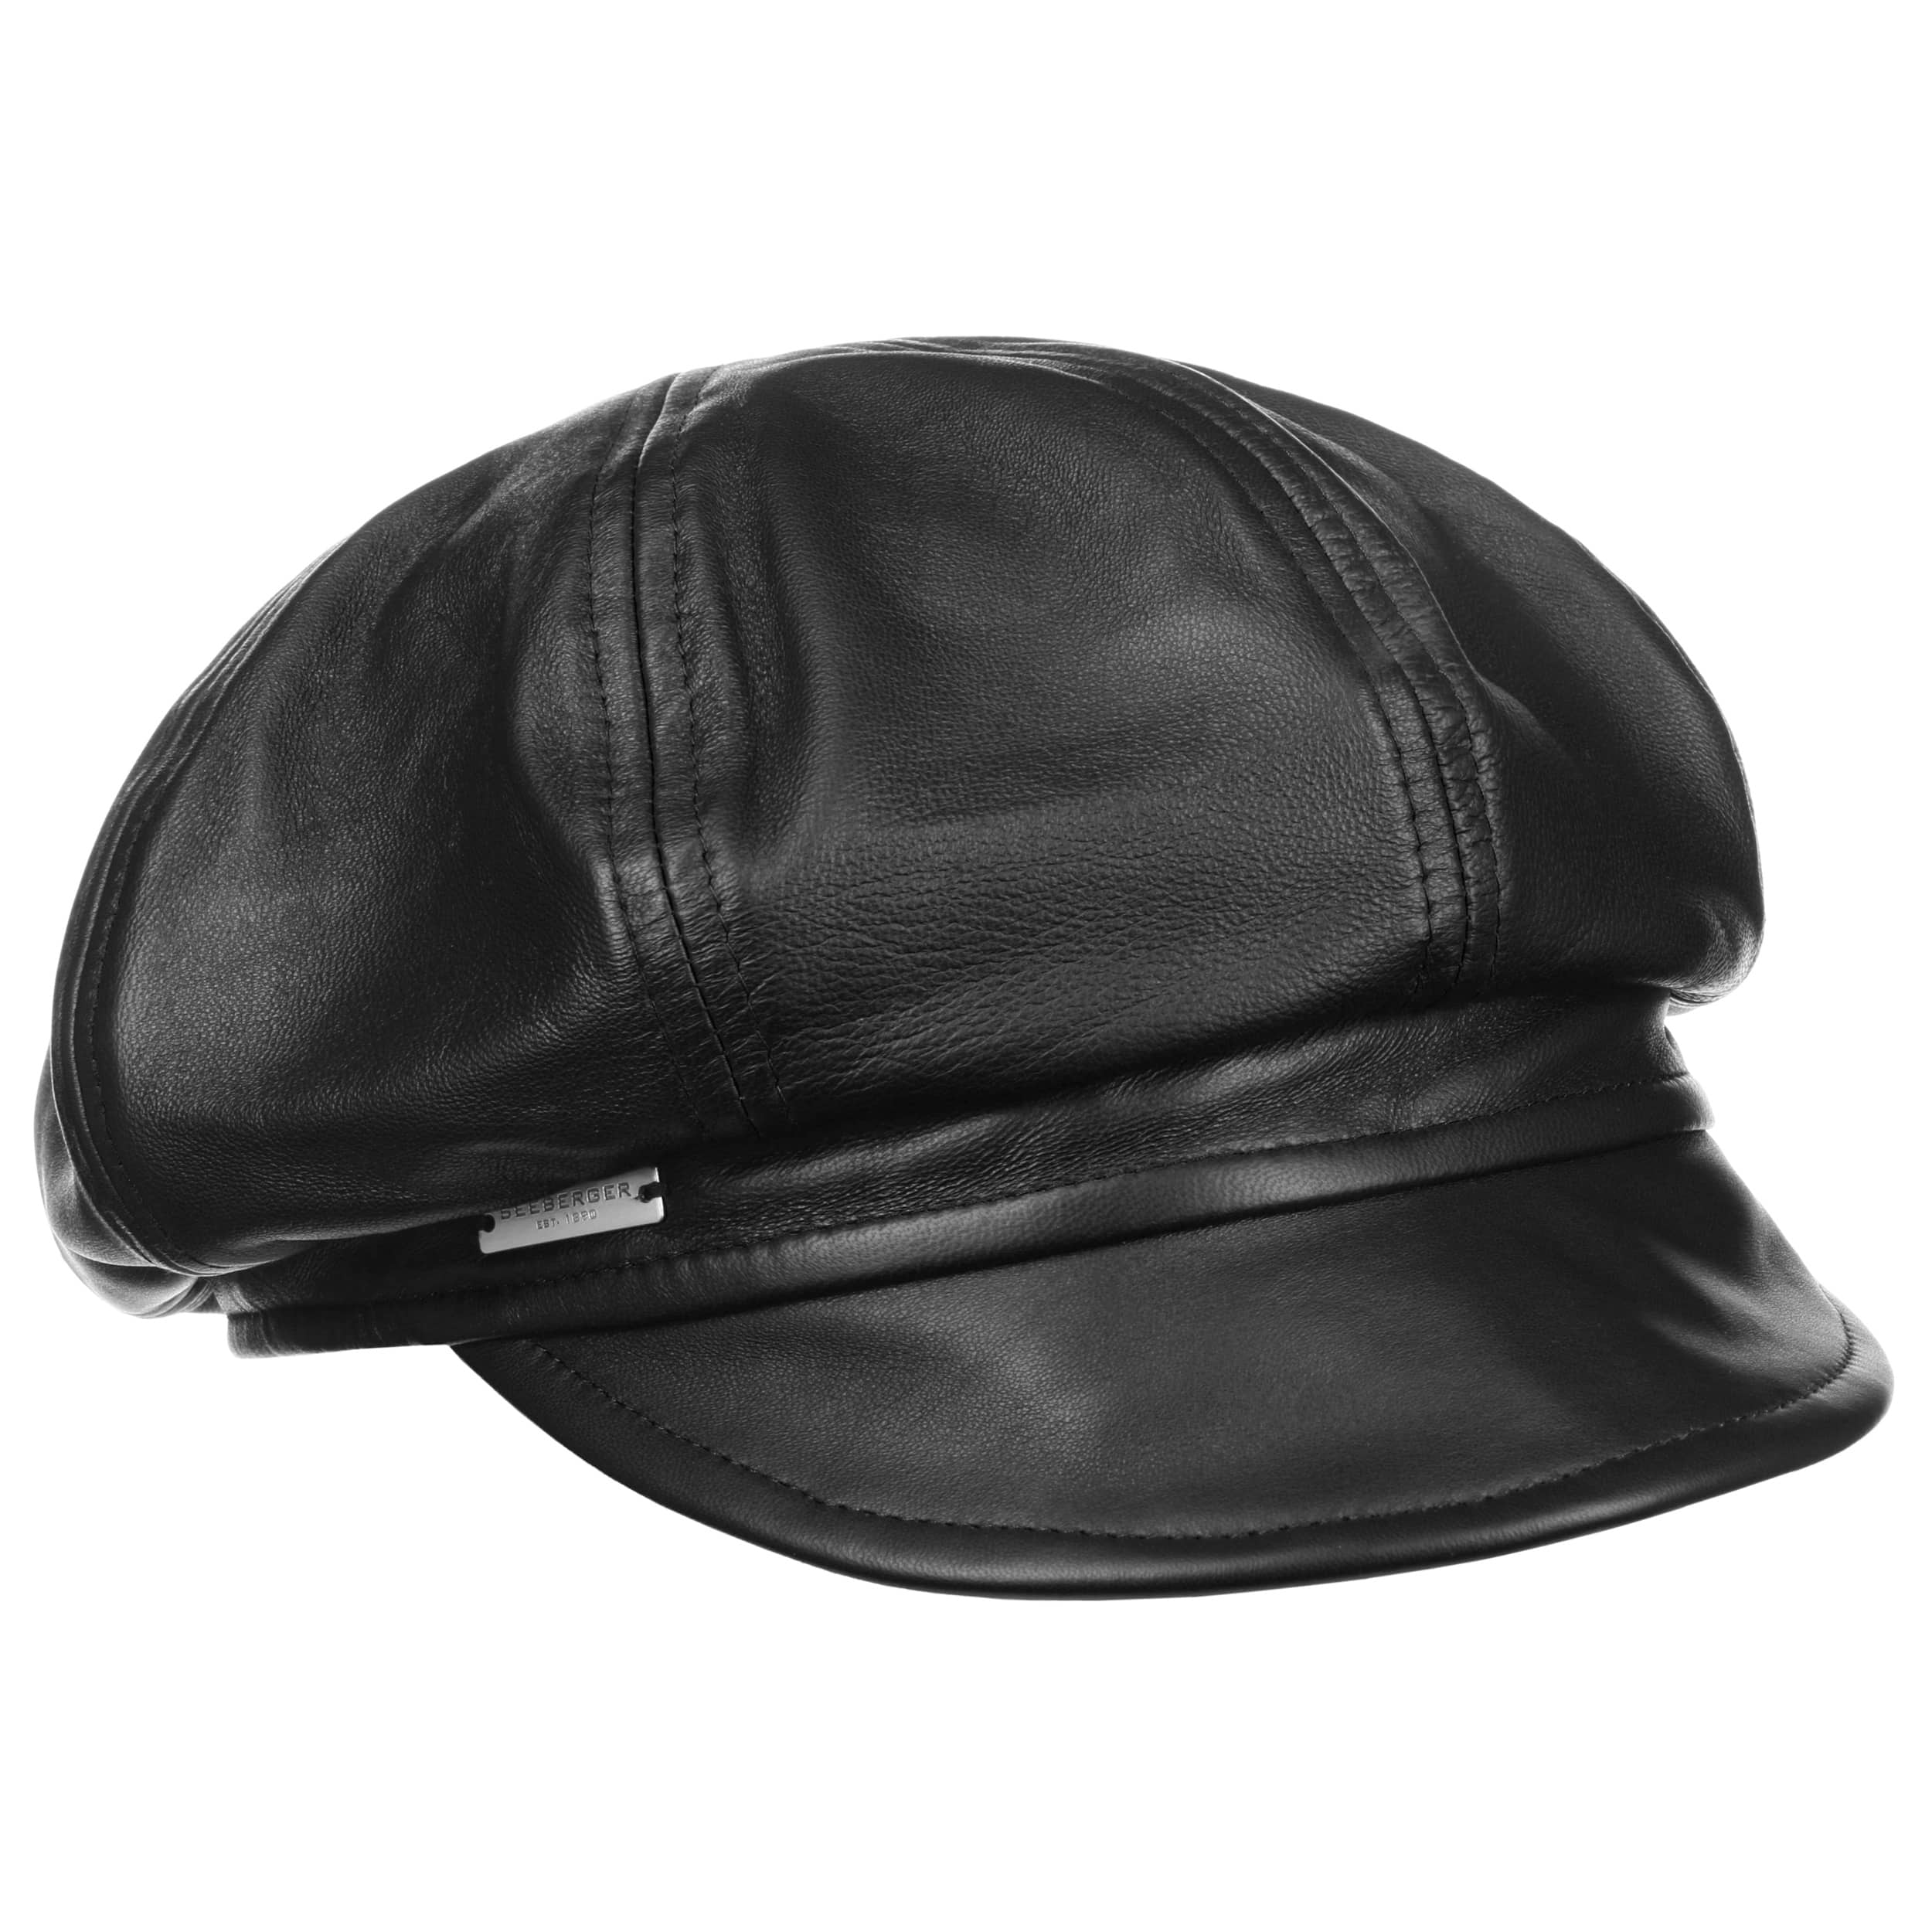 Leather Newsboy Cap by Seeberger - 73,95